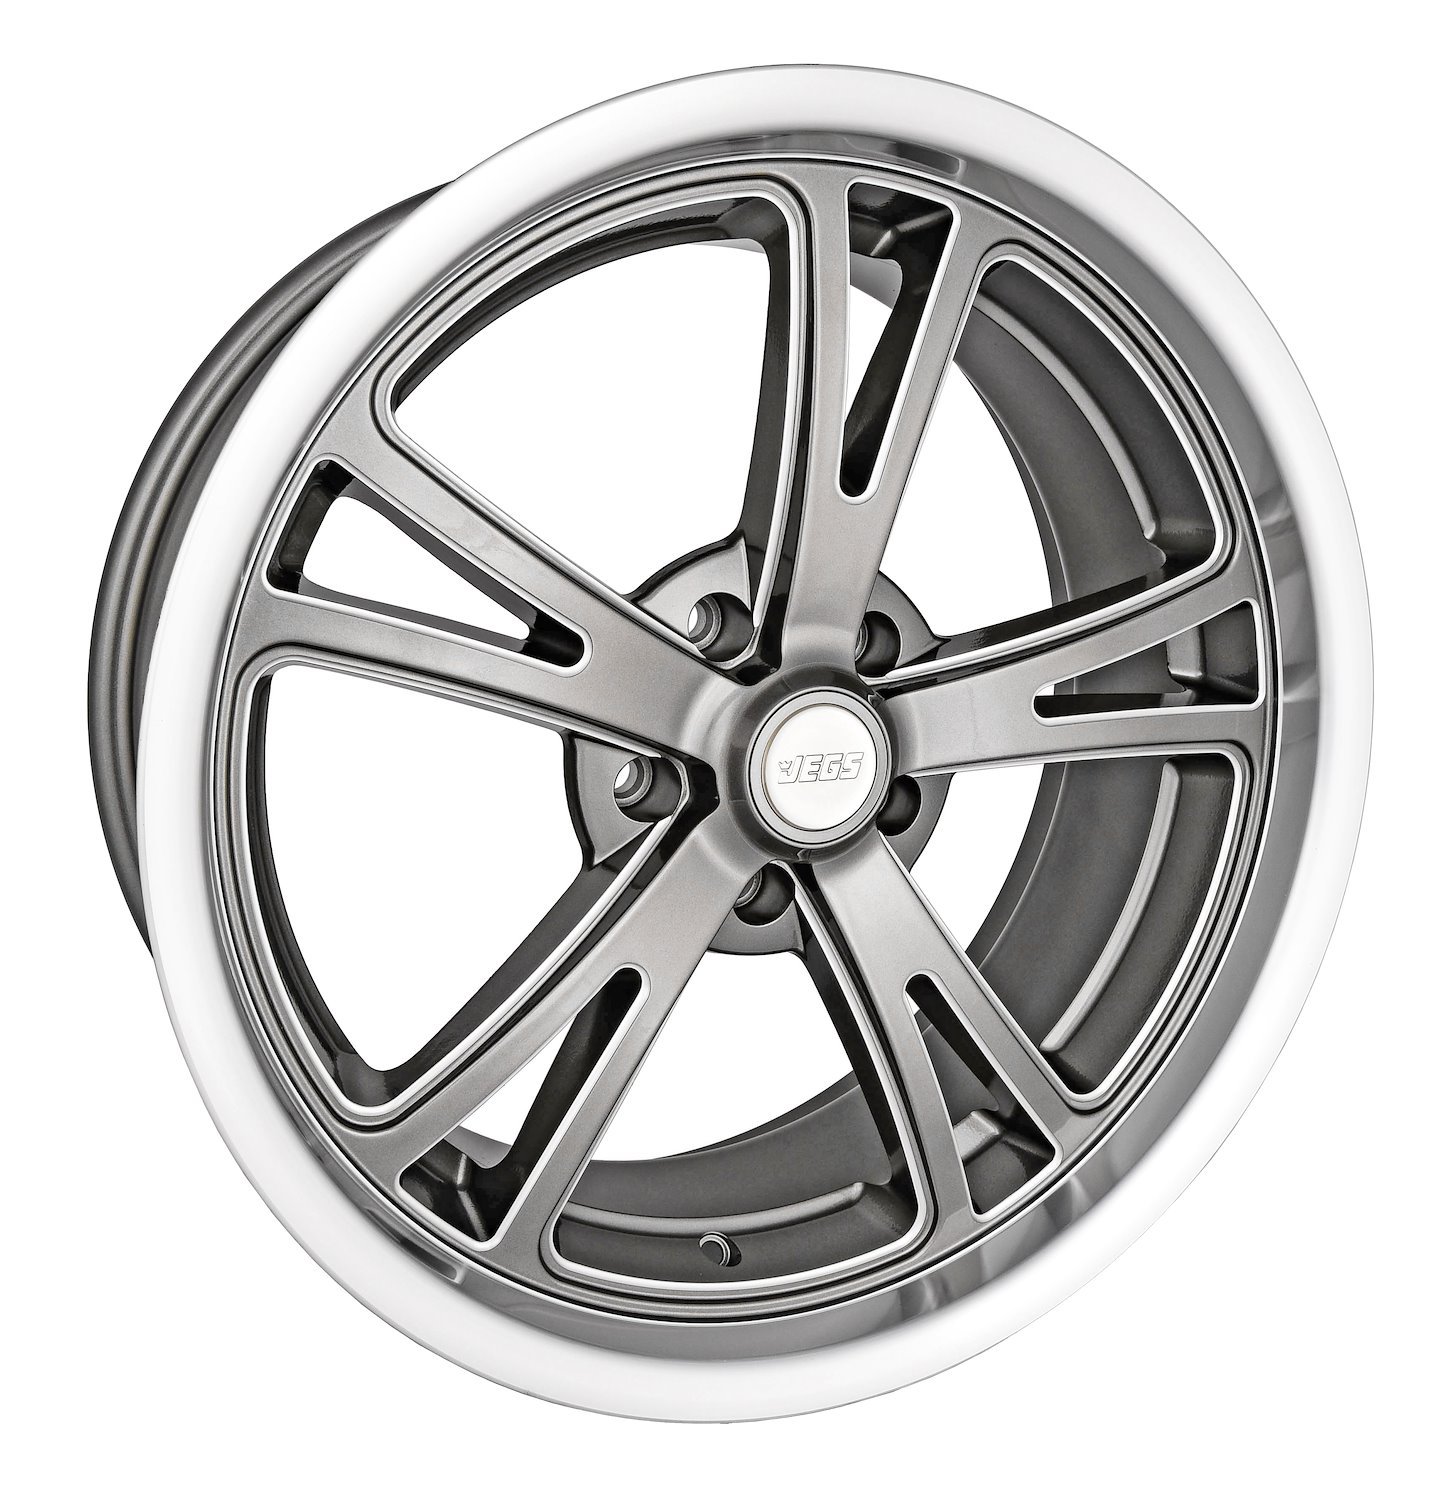 JV-1 Wheel [Size: 20" x 8.50"] Grey Spokes with Milled Outer Lip